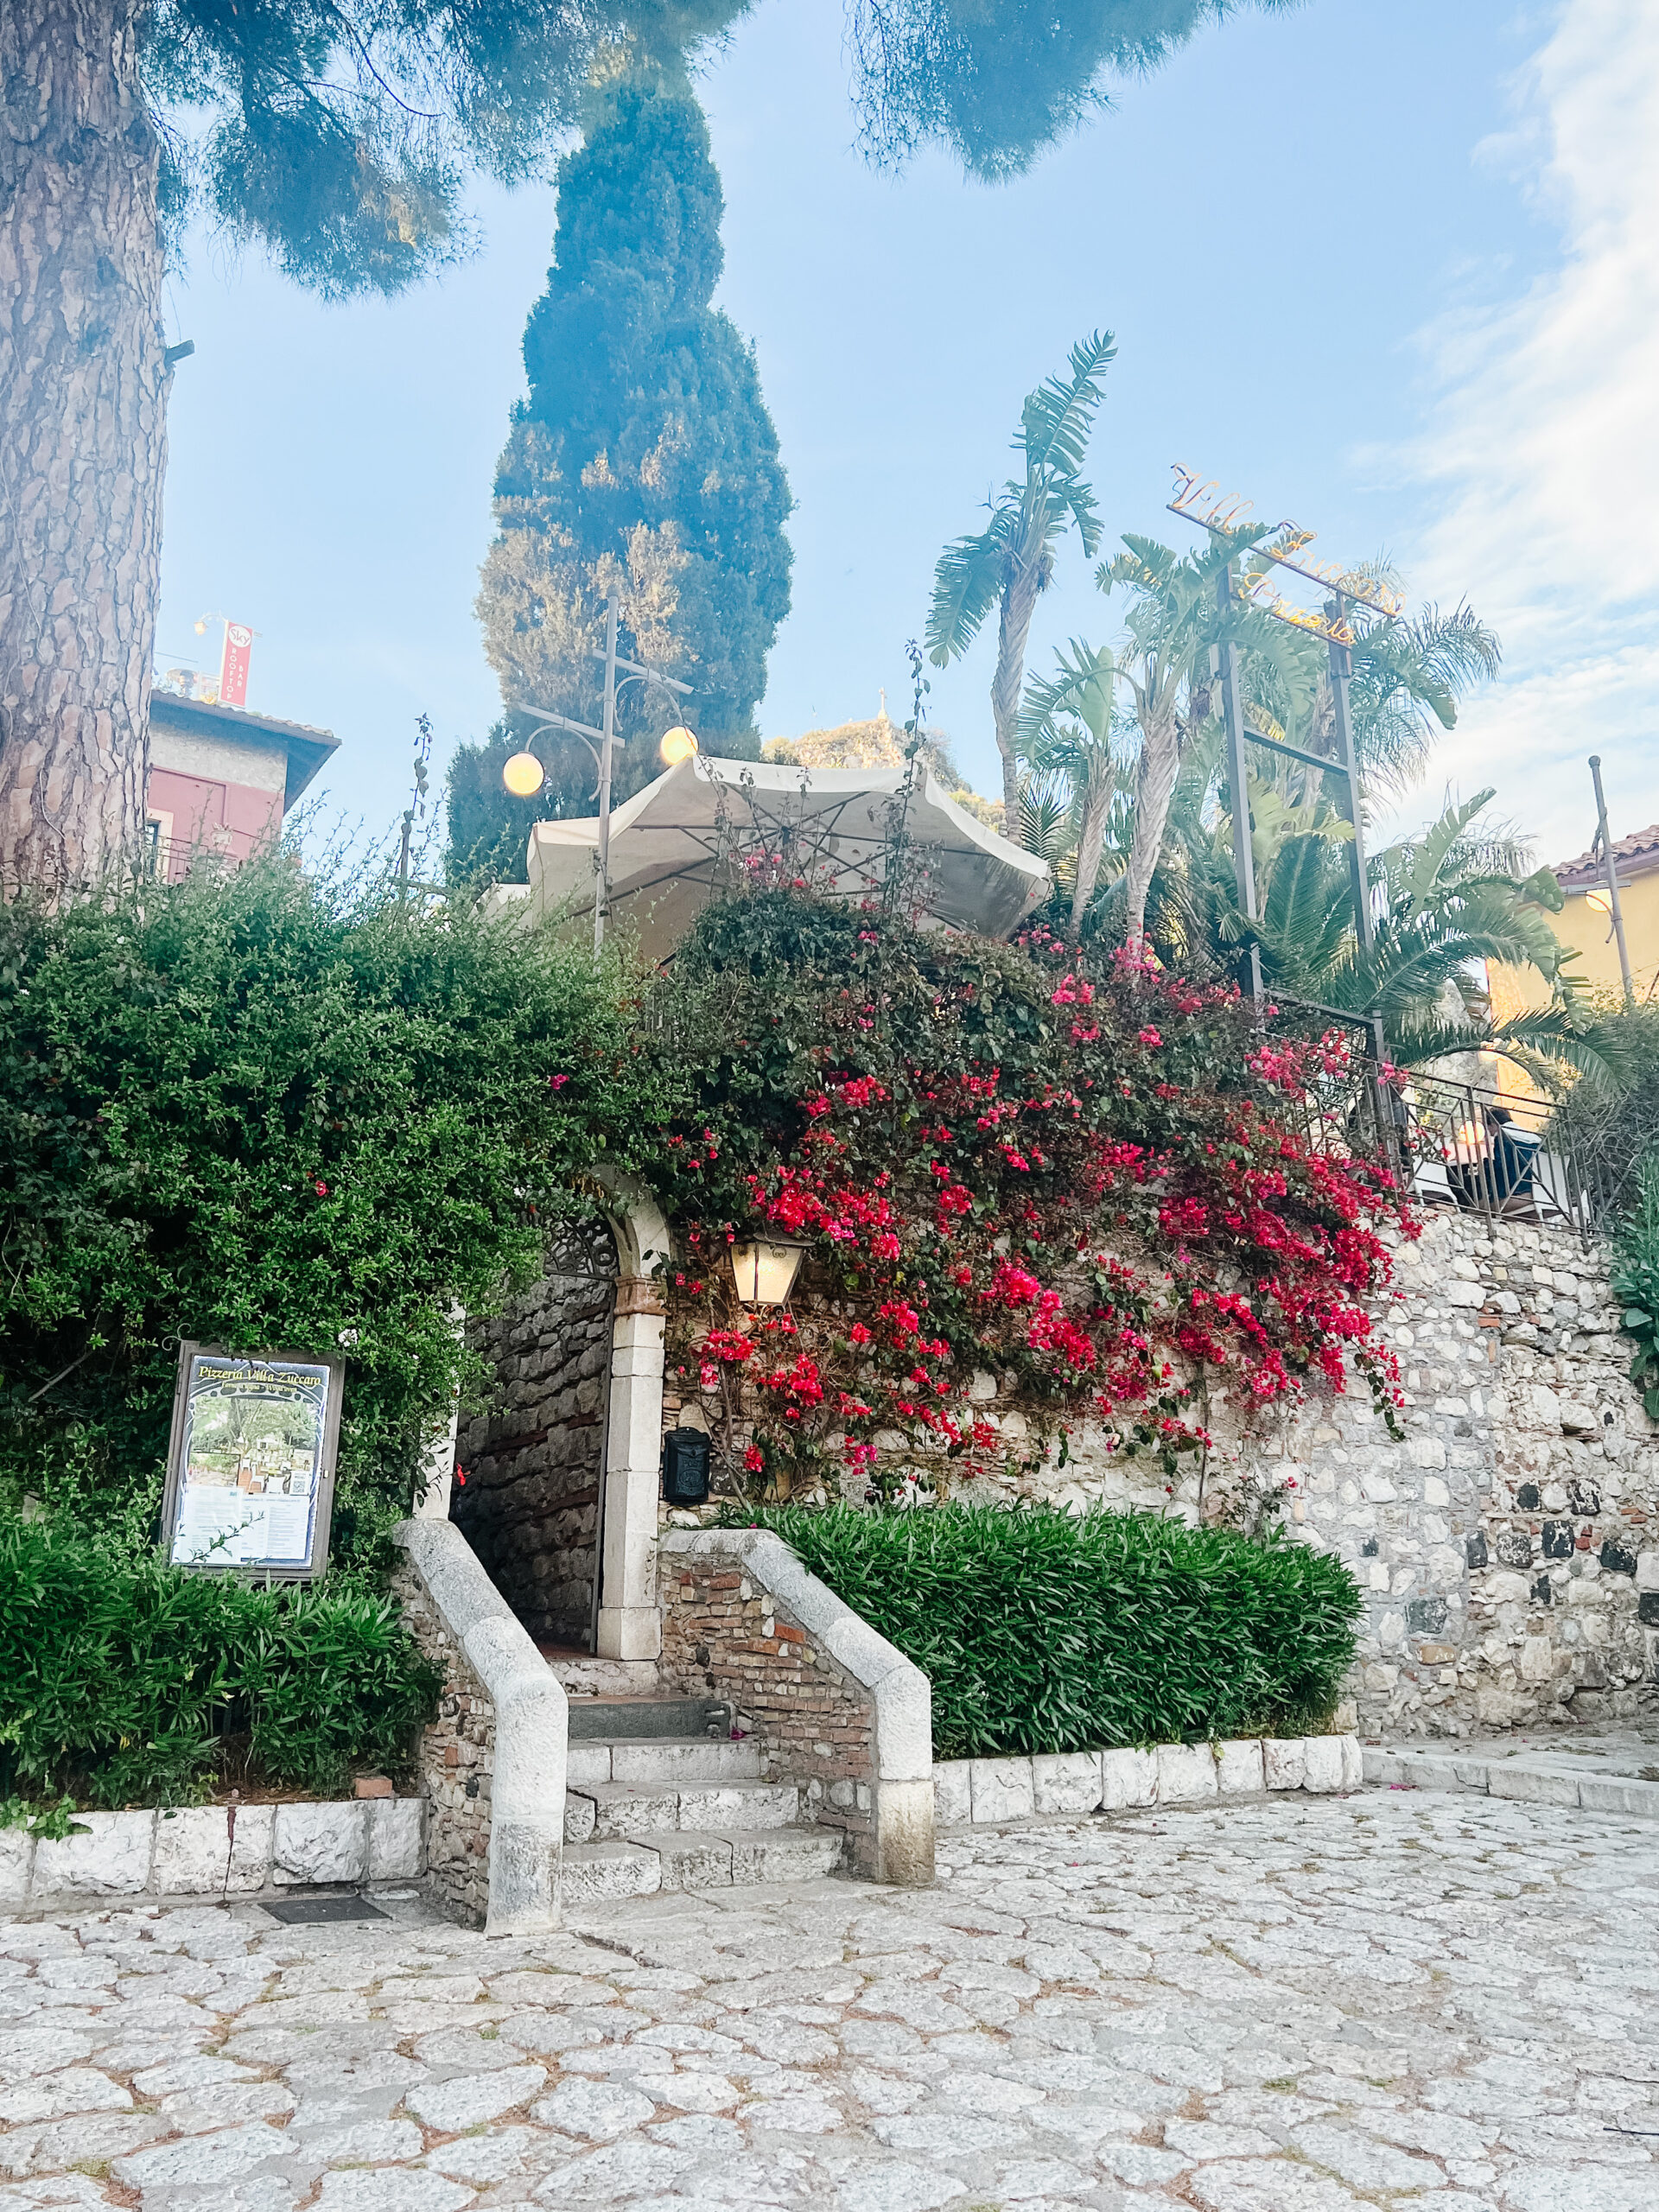 Villa Zucharo Pizzeria Taormina Sicily entrance with florals and steps